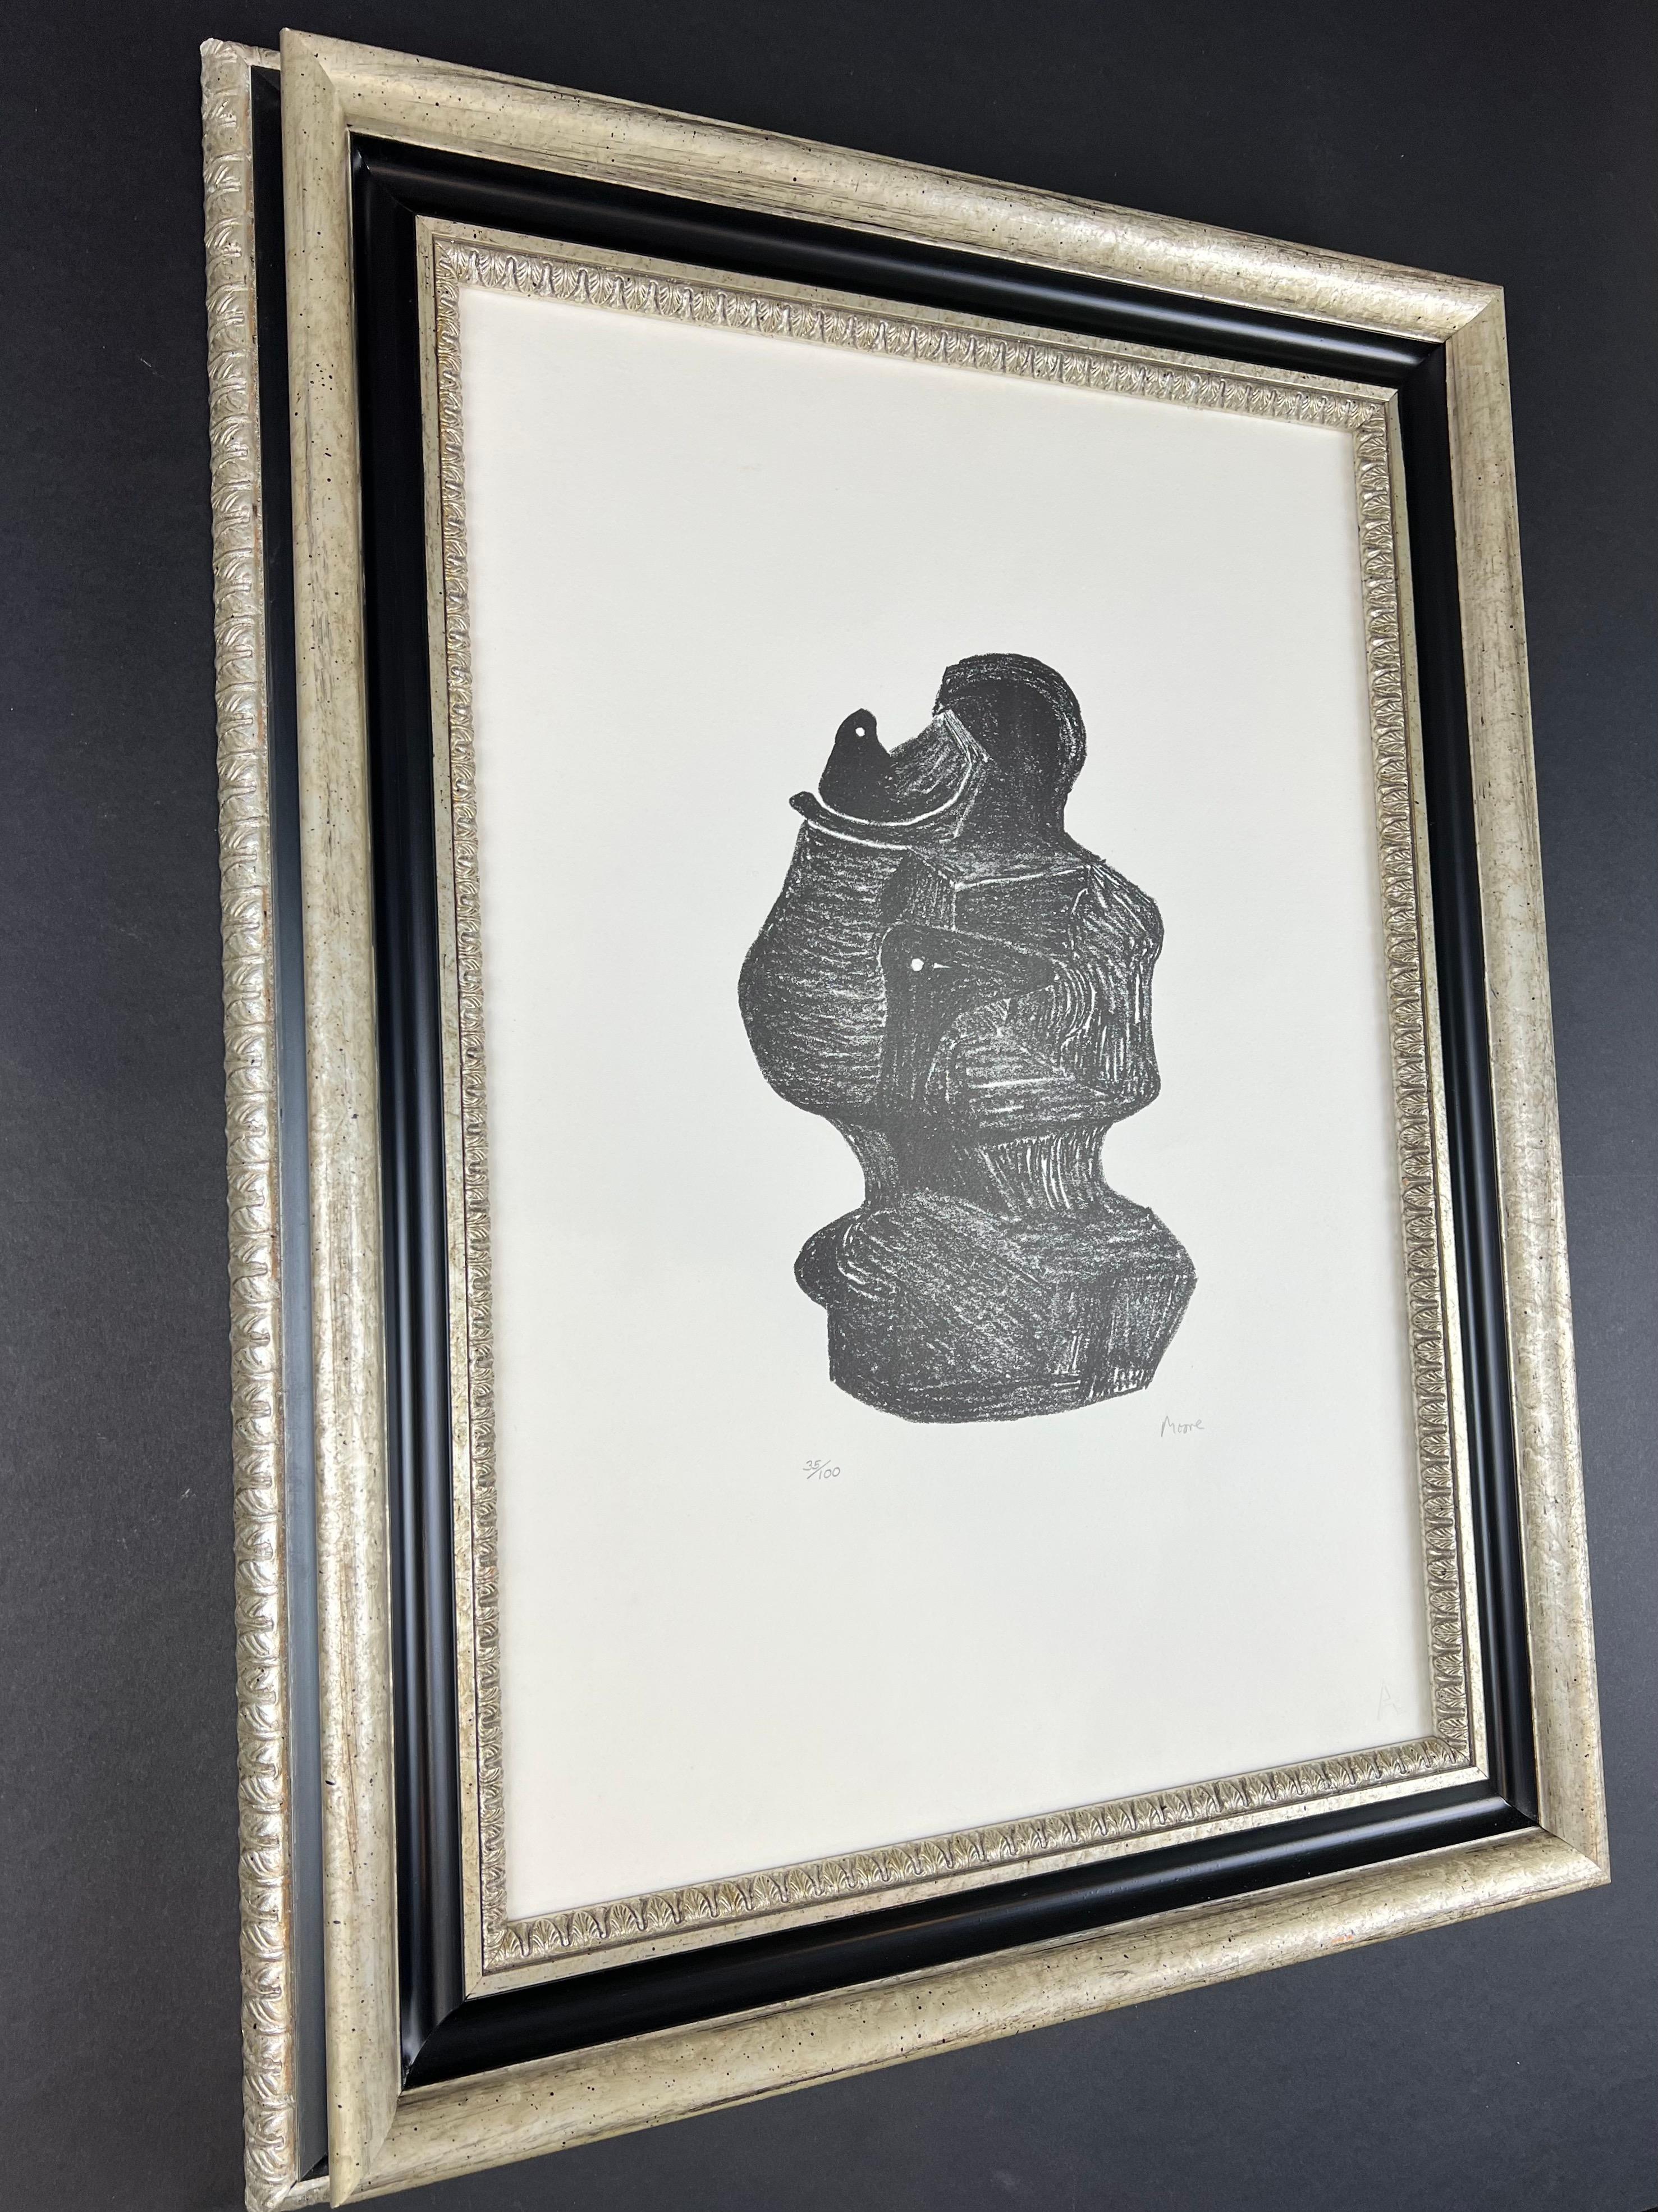  Henry Moore ( 1898 - 1986 ) - Mother and son - hand-signed lithography - 1974 2